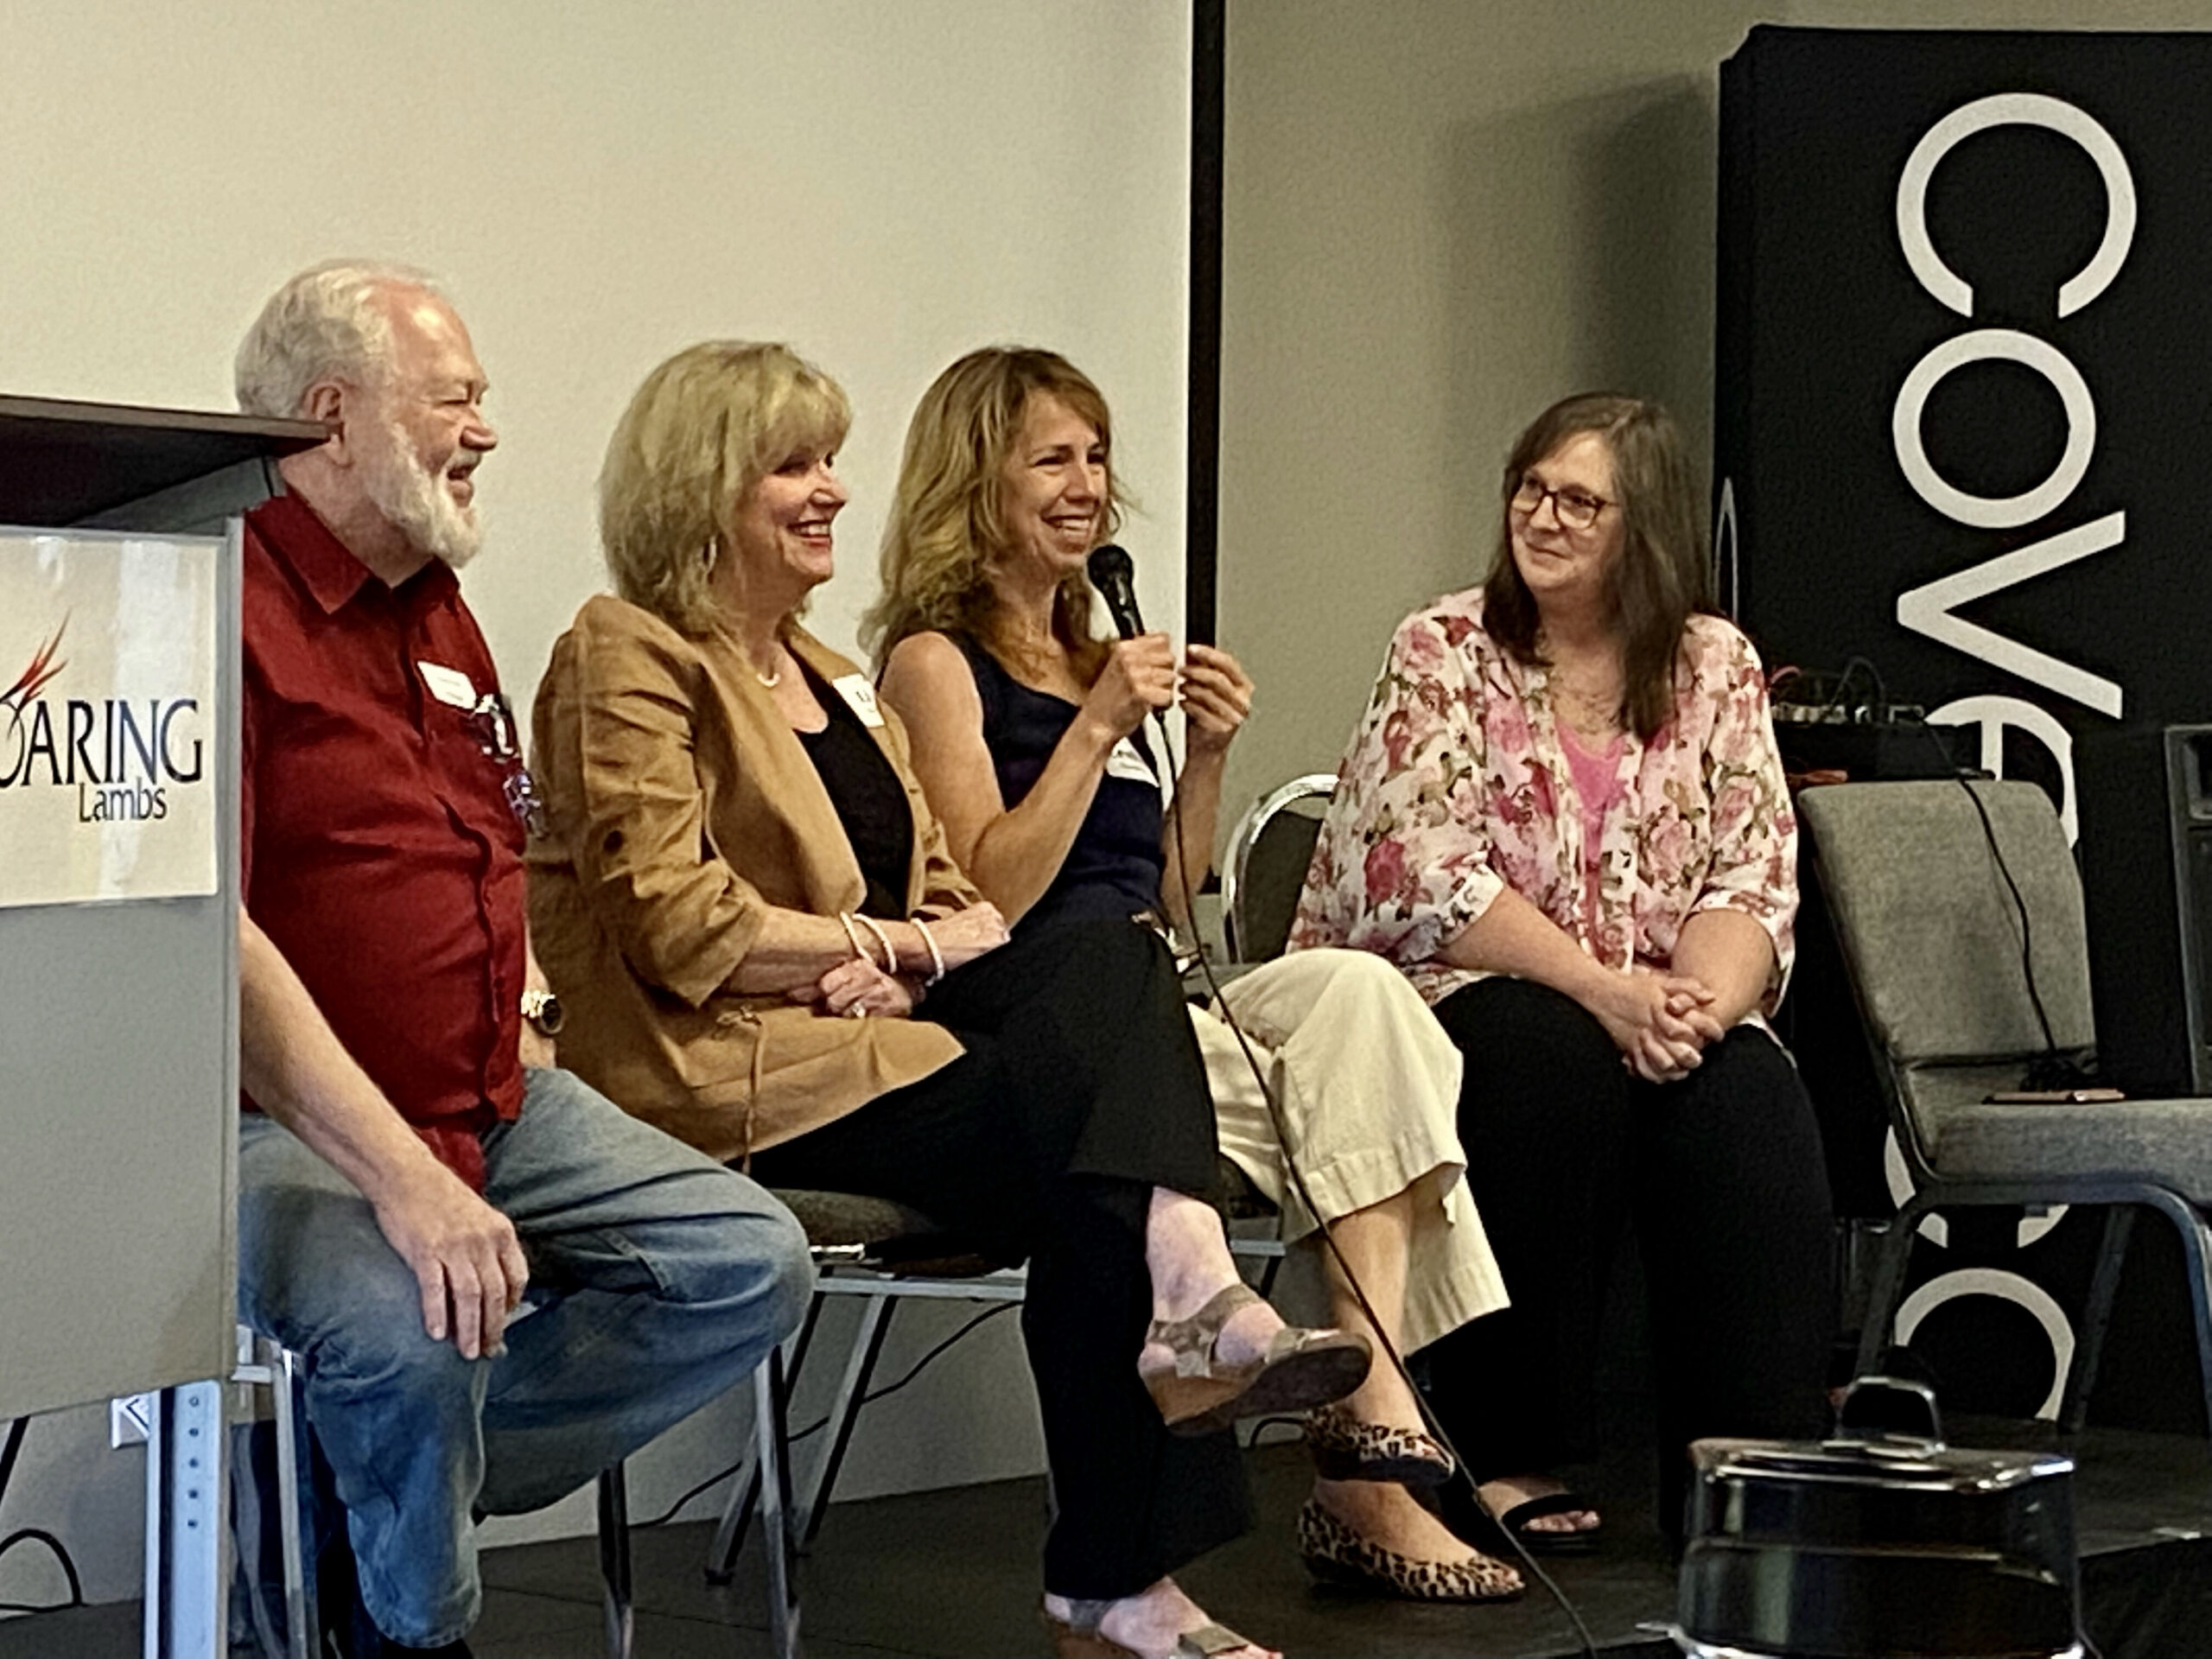 Christian author Leslie J Thompson was among the featured panelists at the Roaring Lambs Writer's Conference